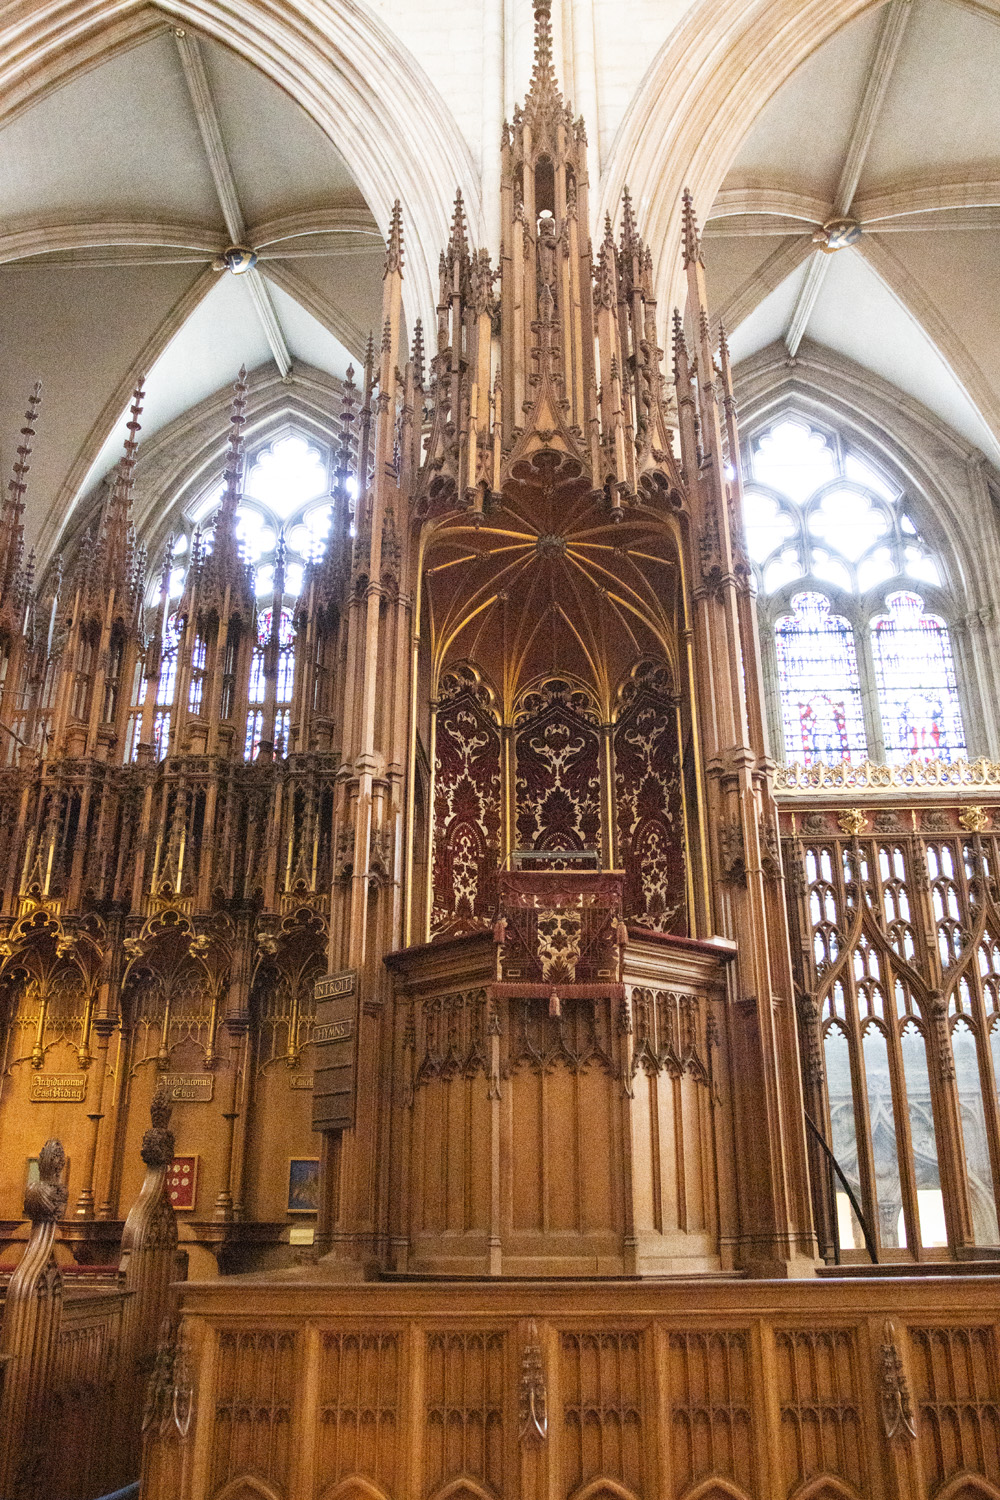 The Cathedra